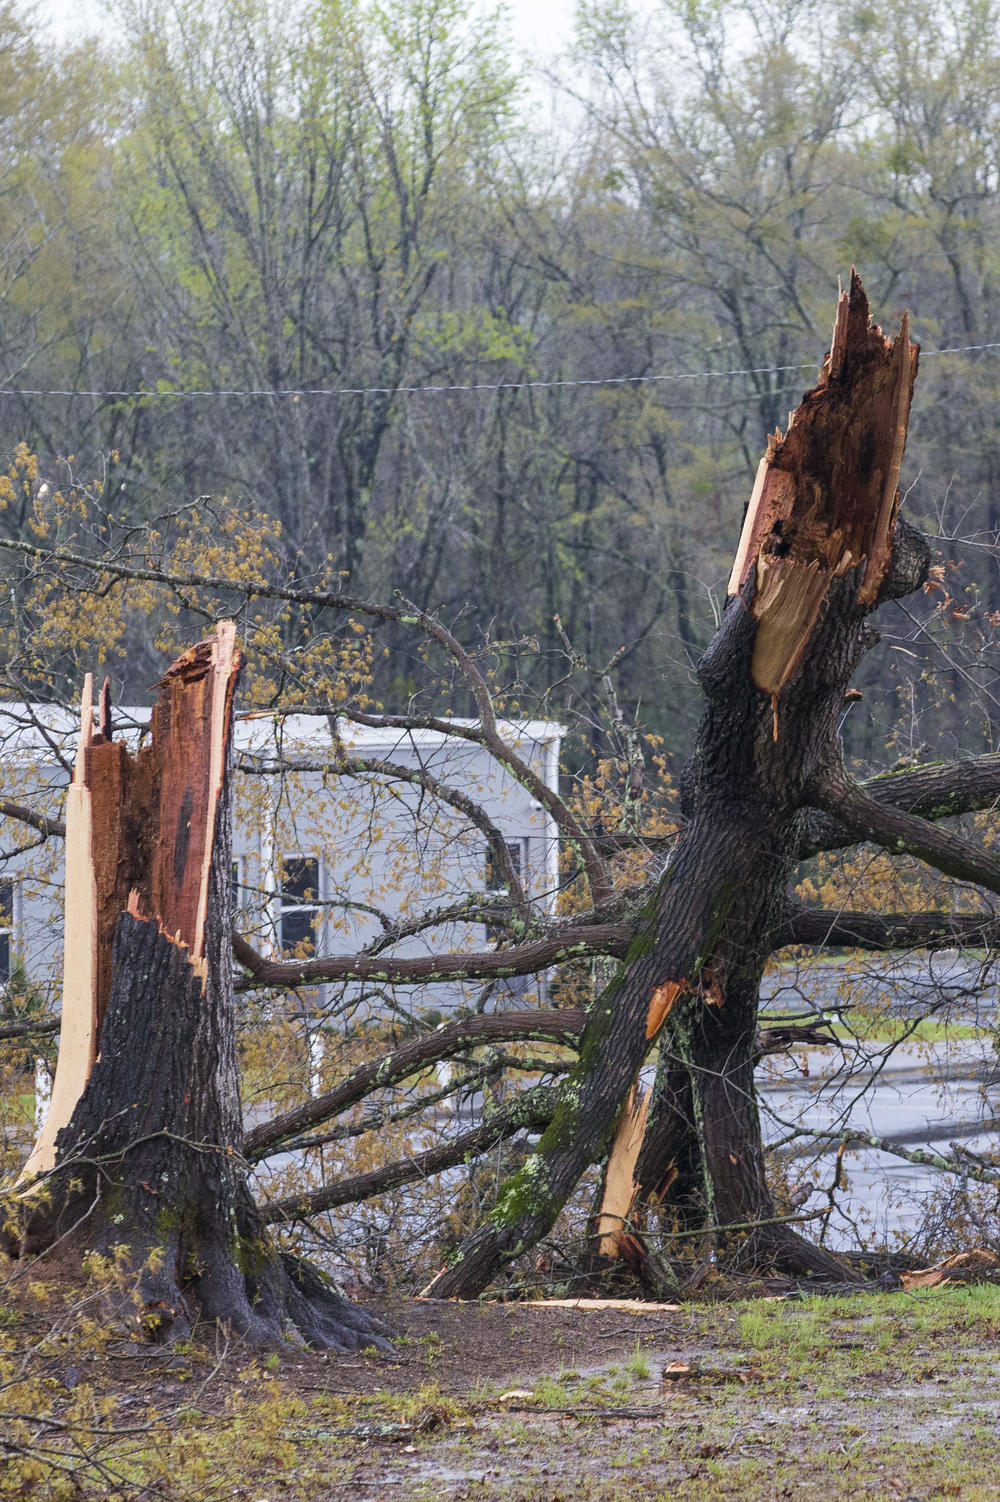 Trees sit uprooted along SR 31 in Pelham, Ala., after a tornado came though on a day of extended severe weather on Thursday. The National Weather Service issued multiple tornado warnings in Alabama and surrounding states where forecasters said conditions were ripe for 